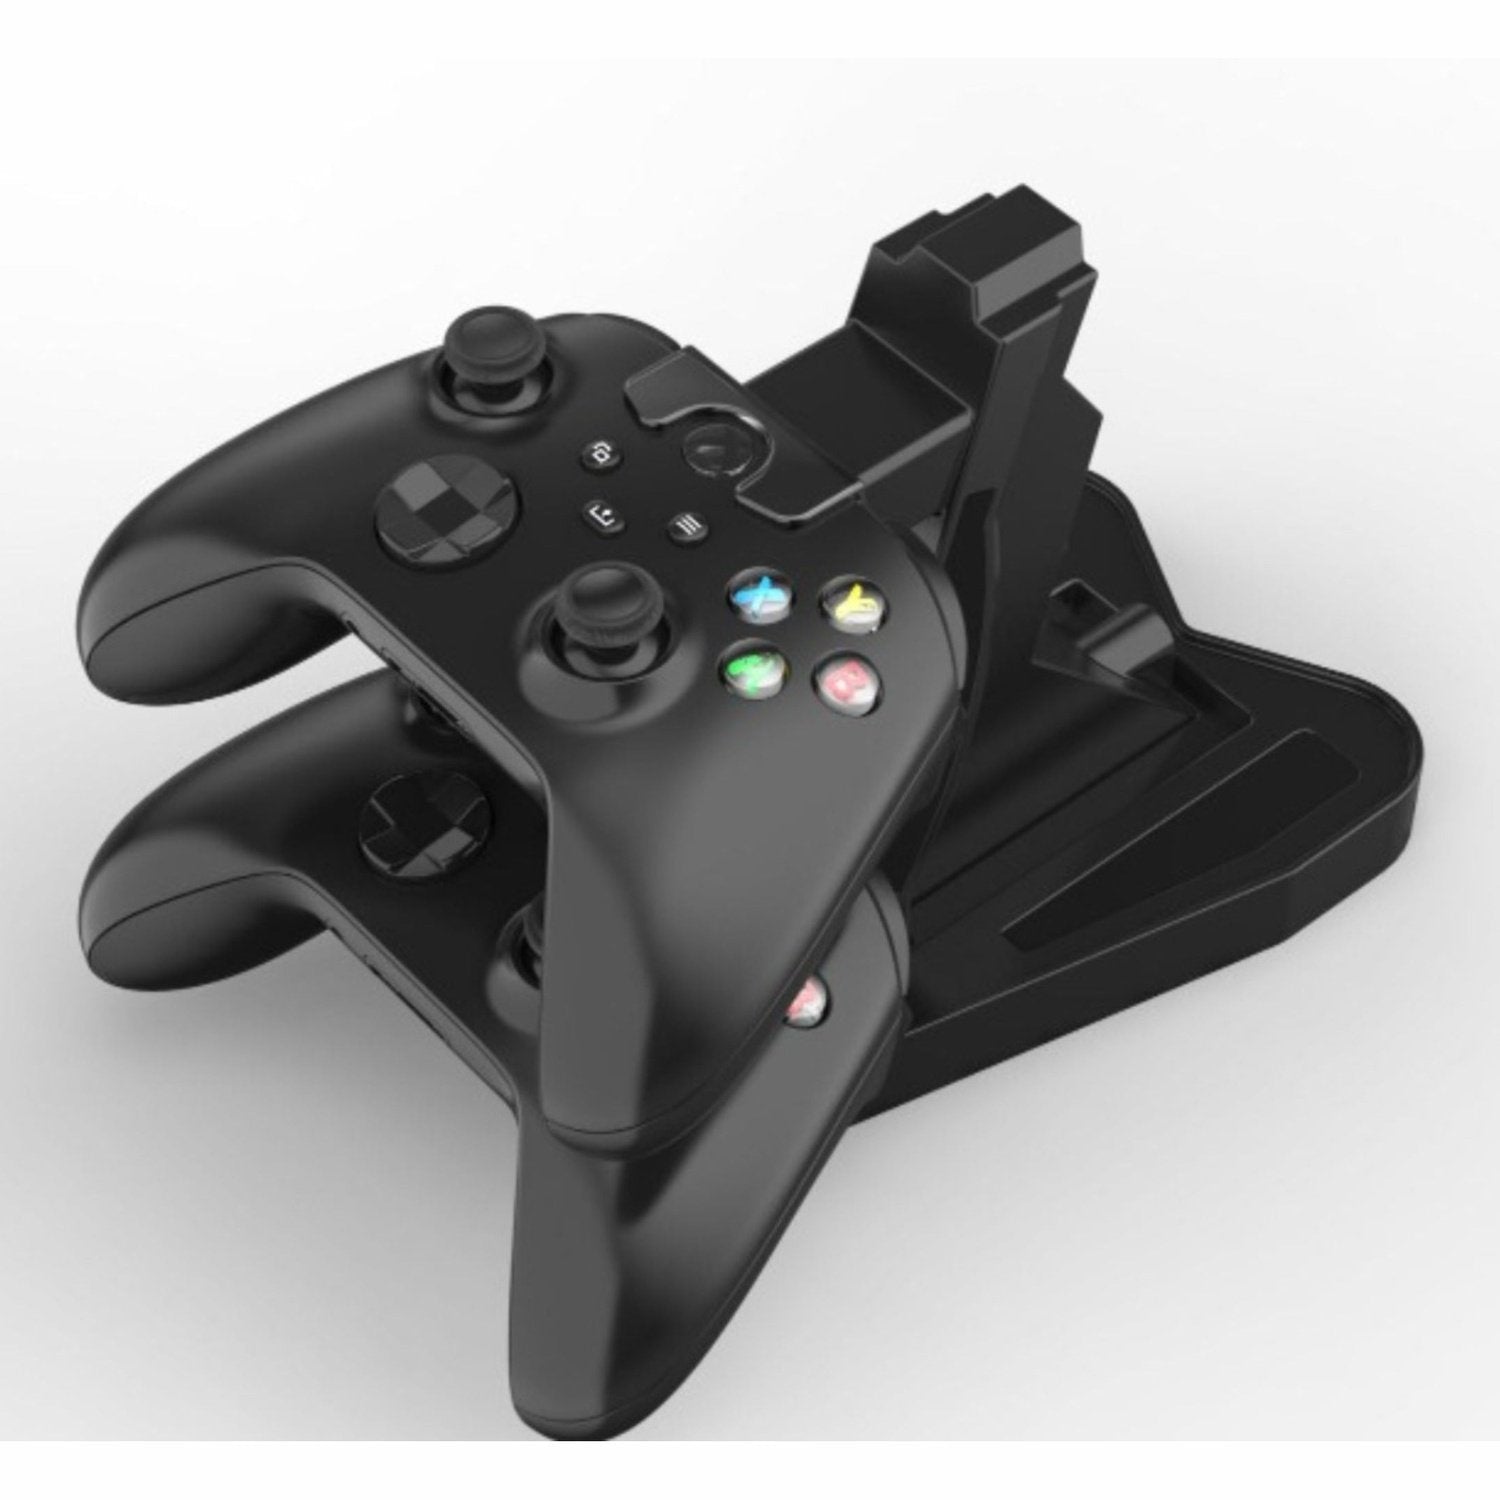 Controller Charger Stand compatible with Xbox Series X | S Controllers | Charging Dock Station with LED Lights